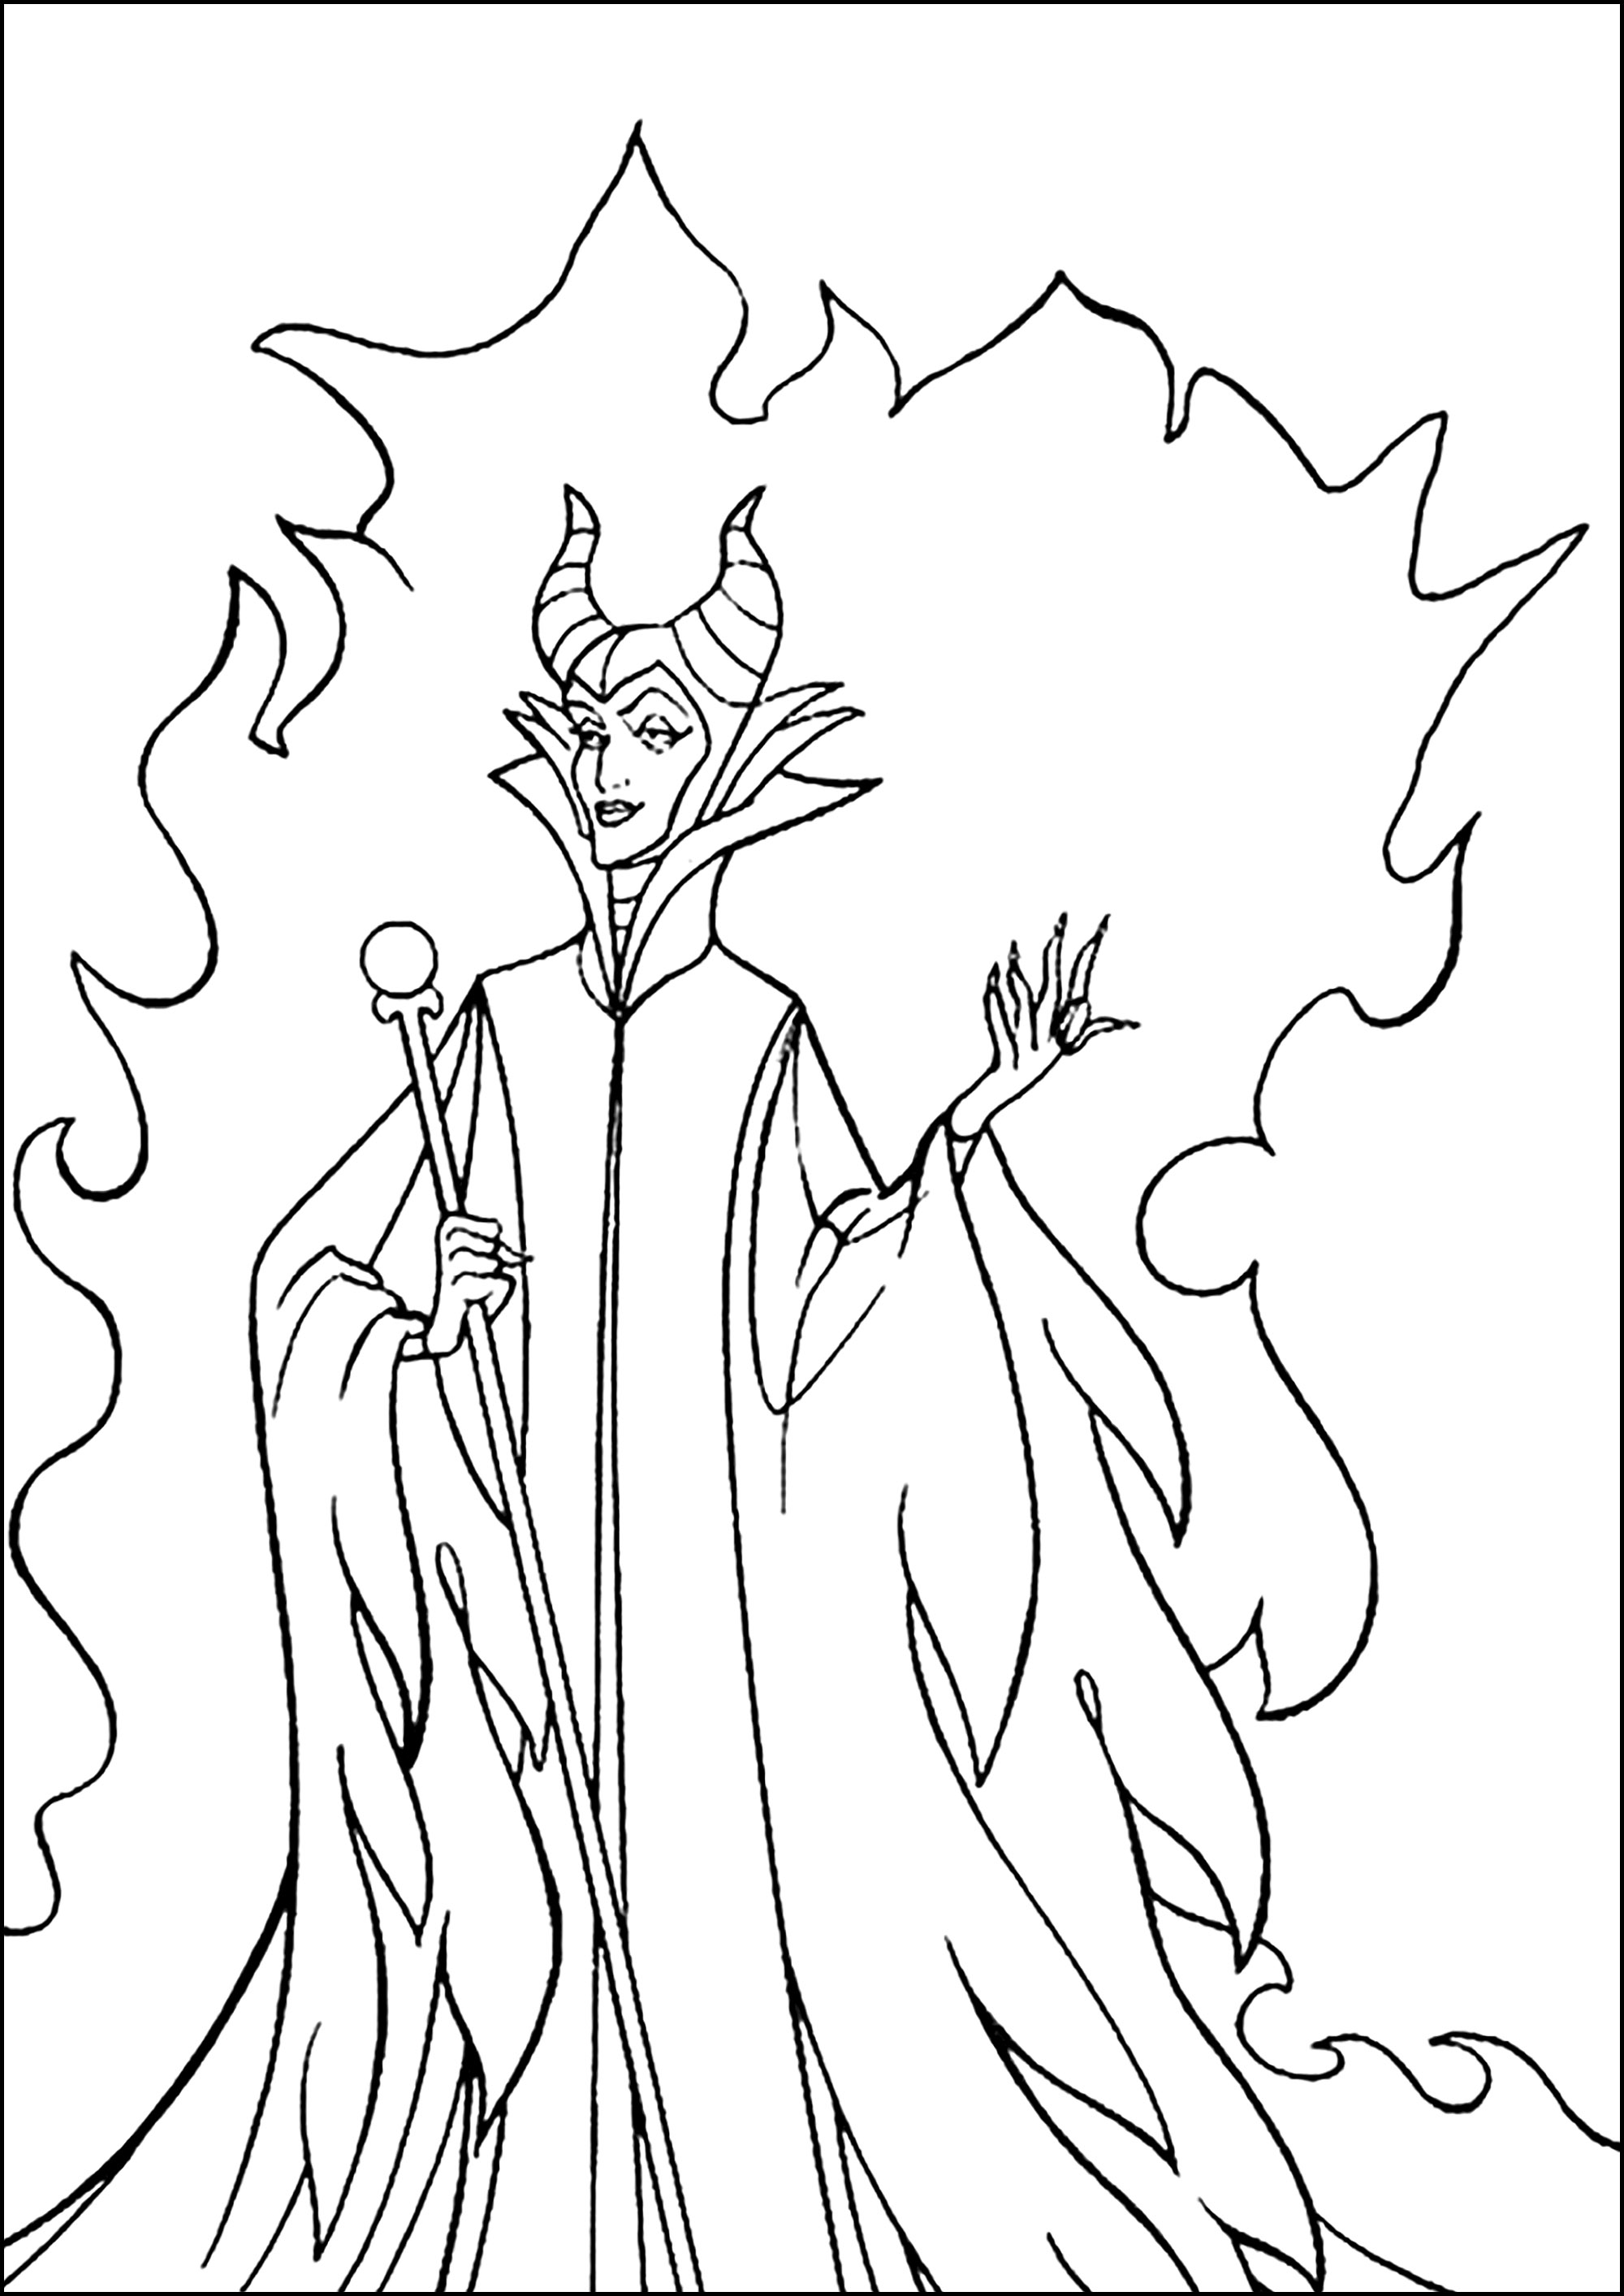 Maleficent in front of flames